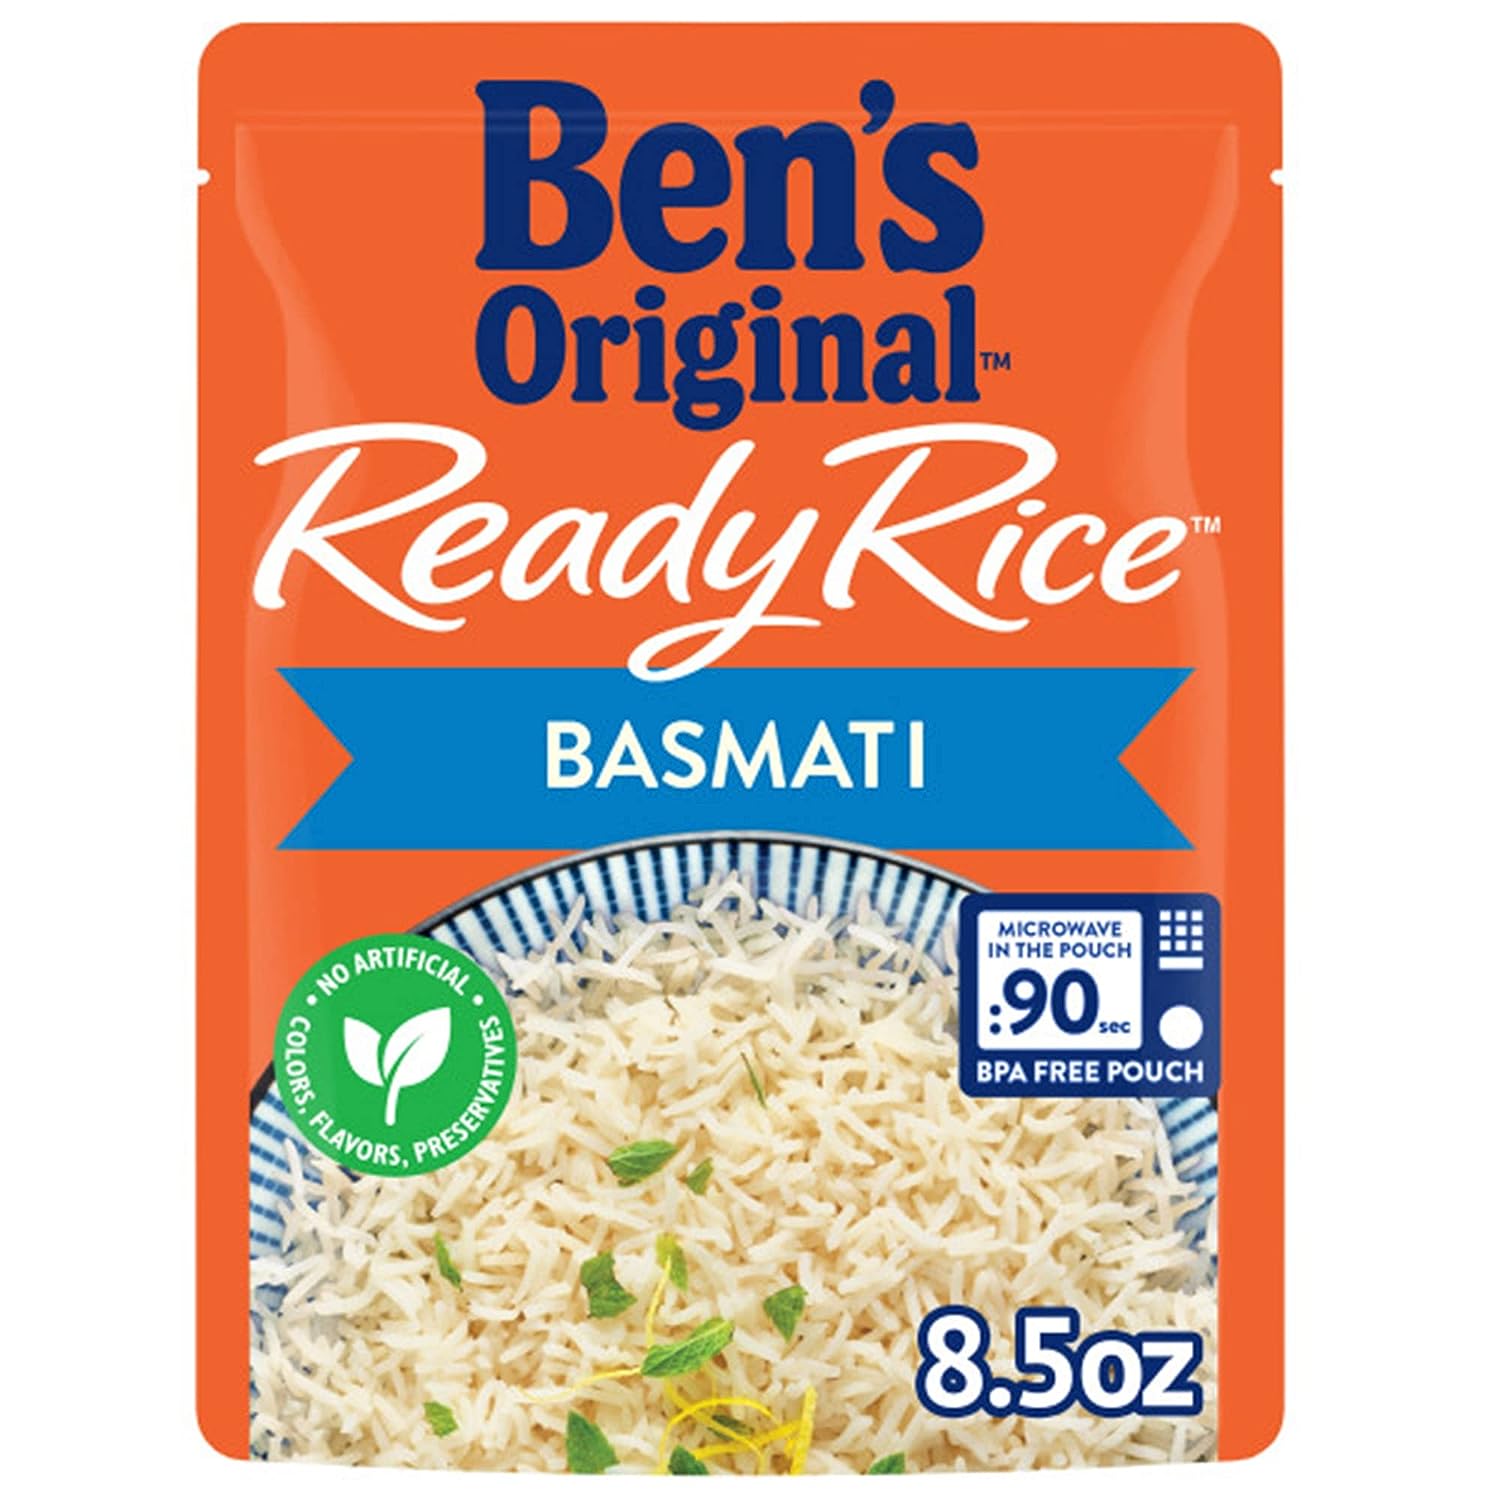 BEN'S ORIGINAL Ready Rice Basmati Rice, Easy Side Dish, 8.5 OZ Pouch (Pack of 12)